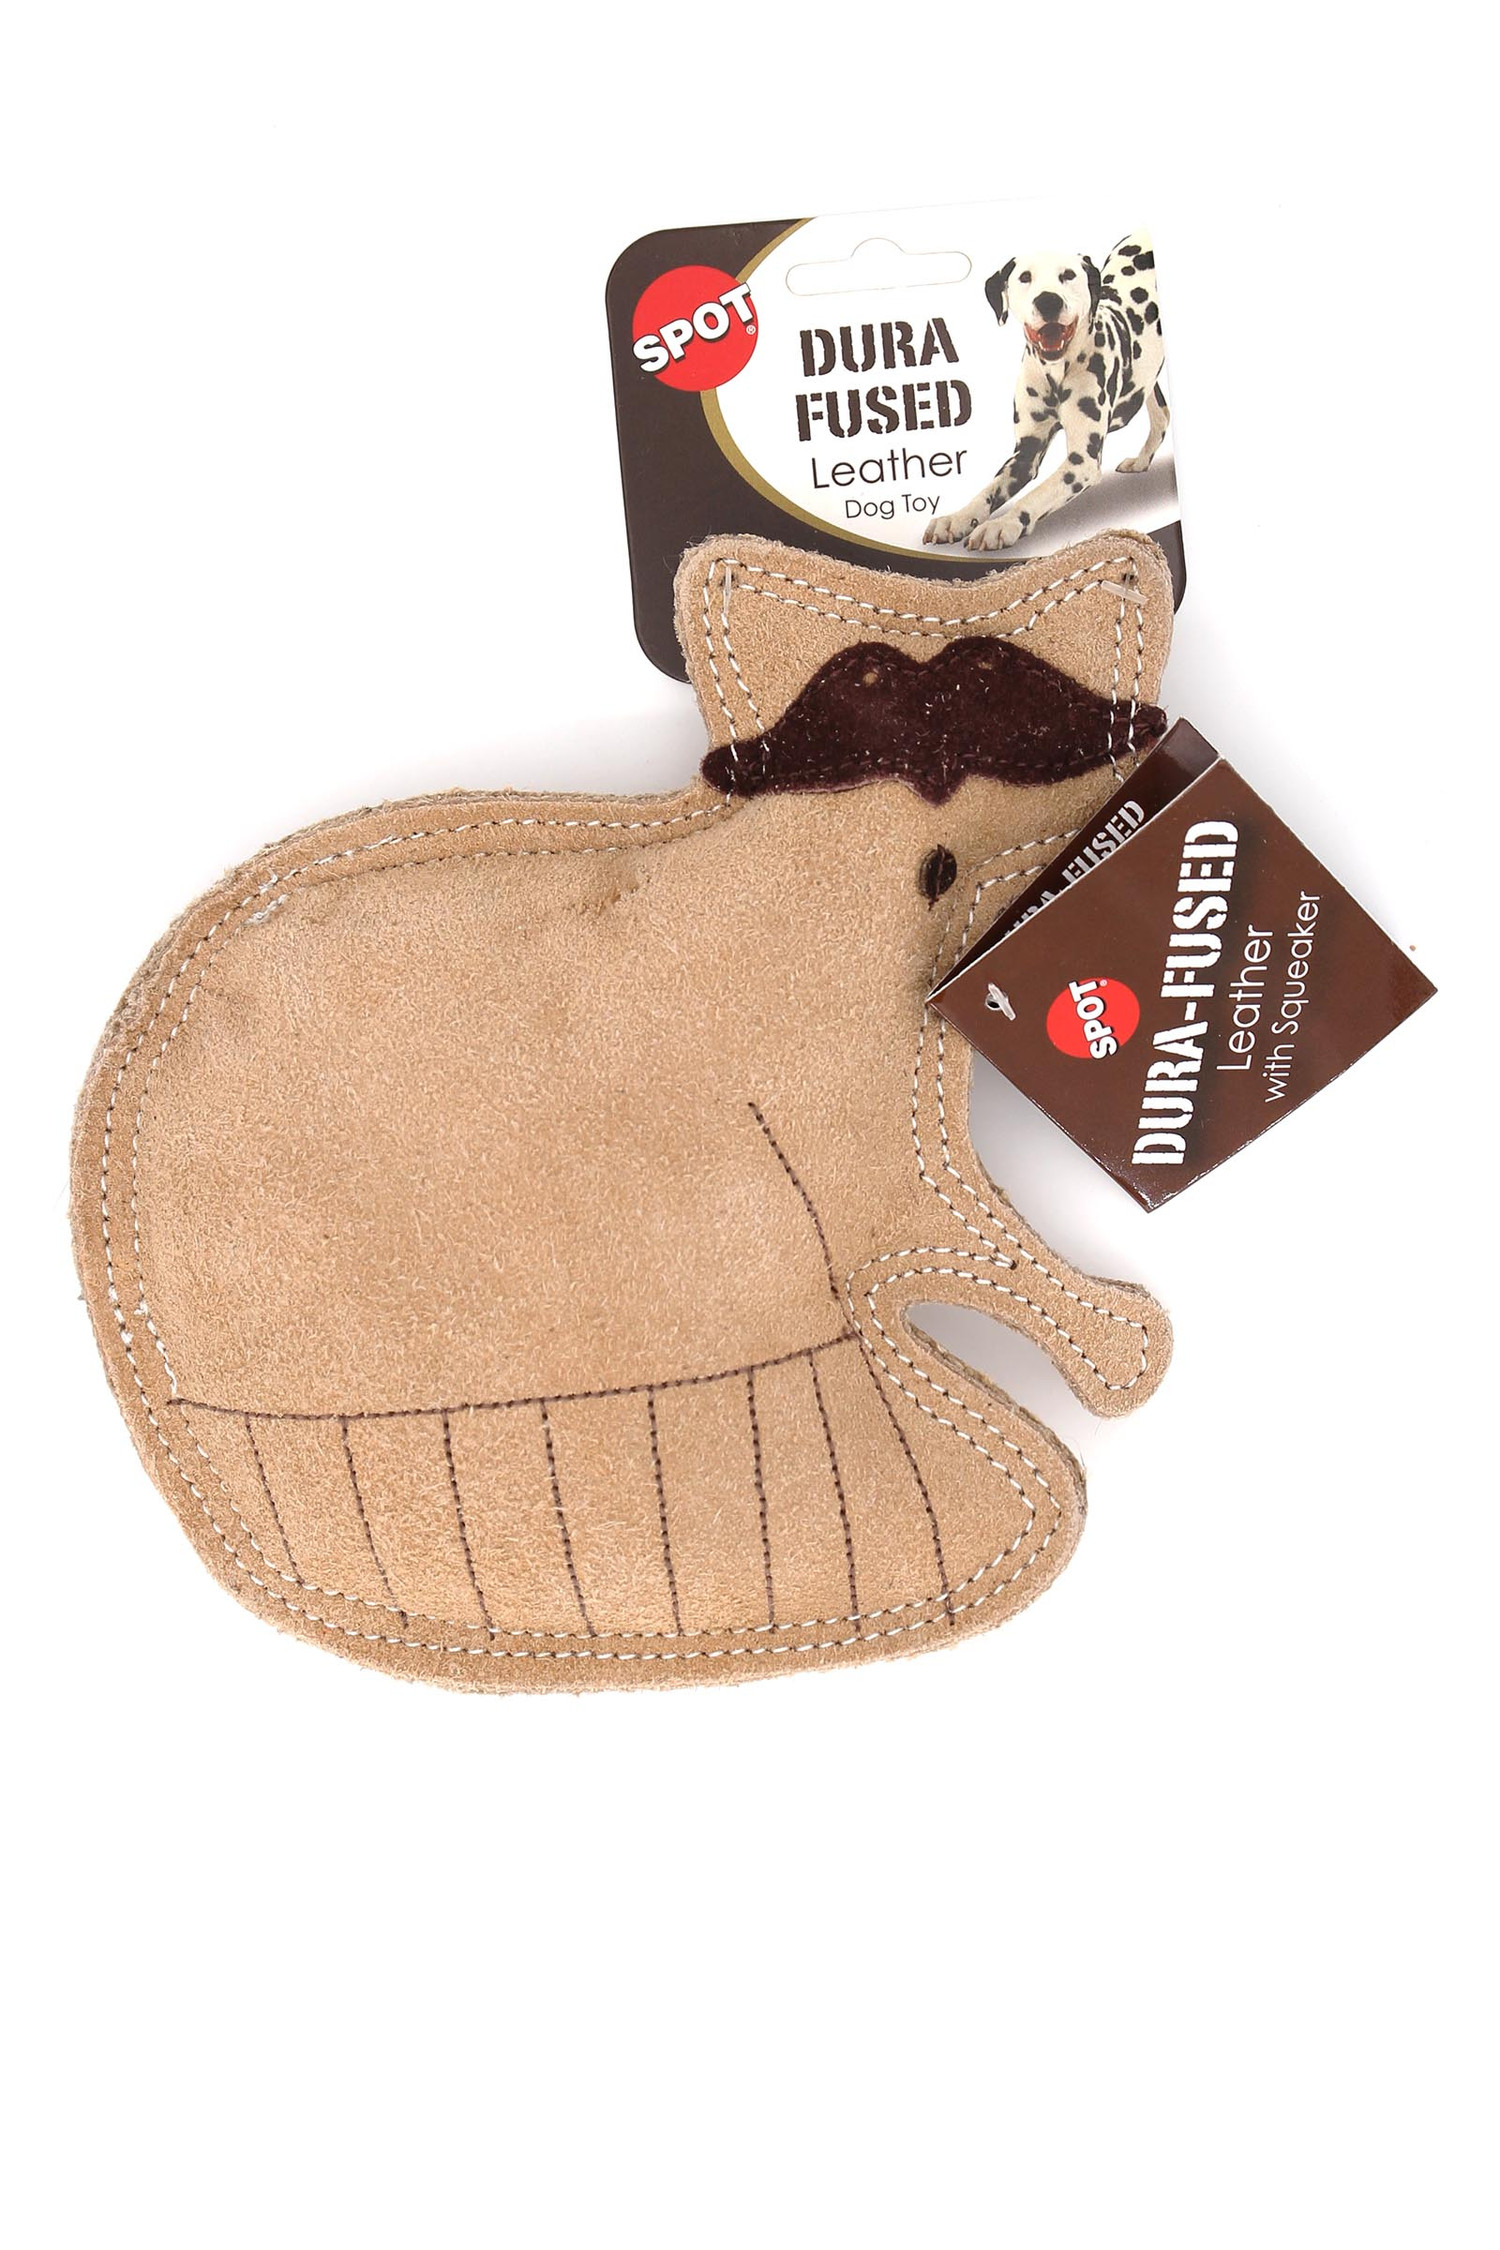 Spot Dura-Fused Leather Raccoon Dog Toy